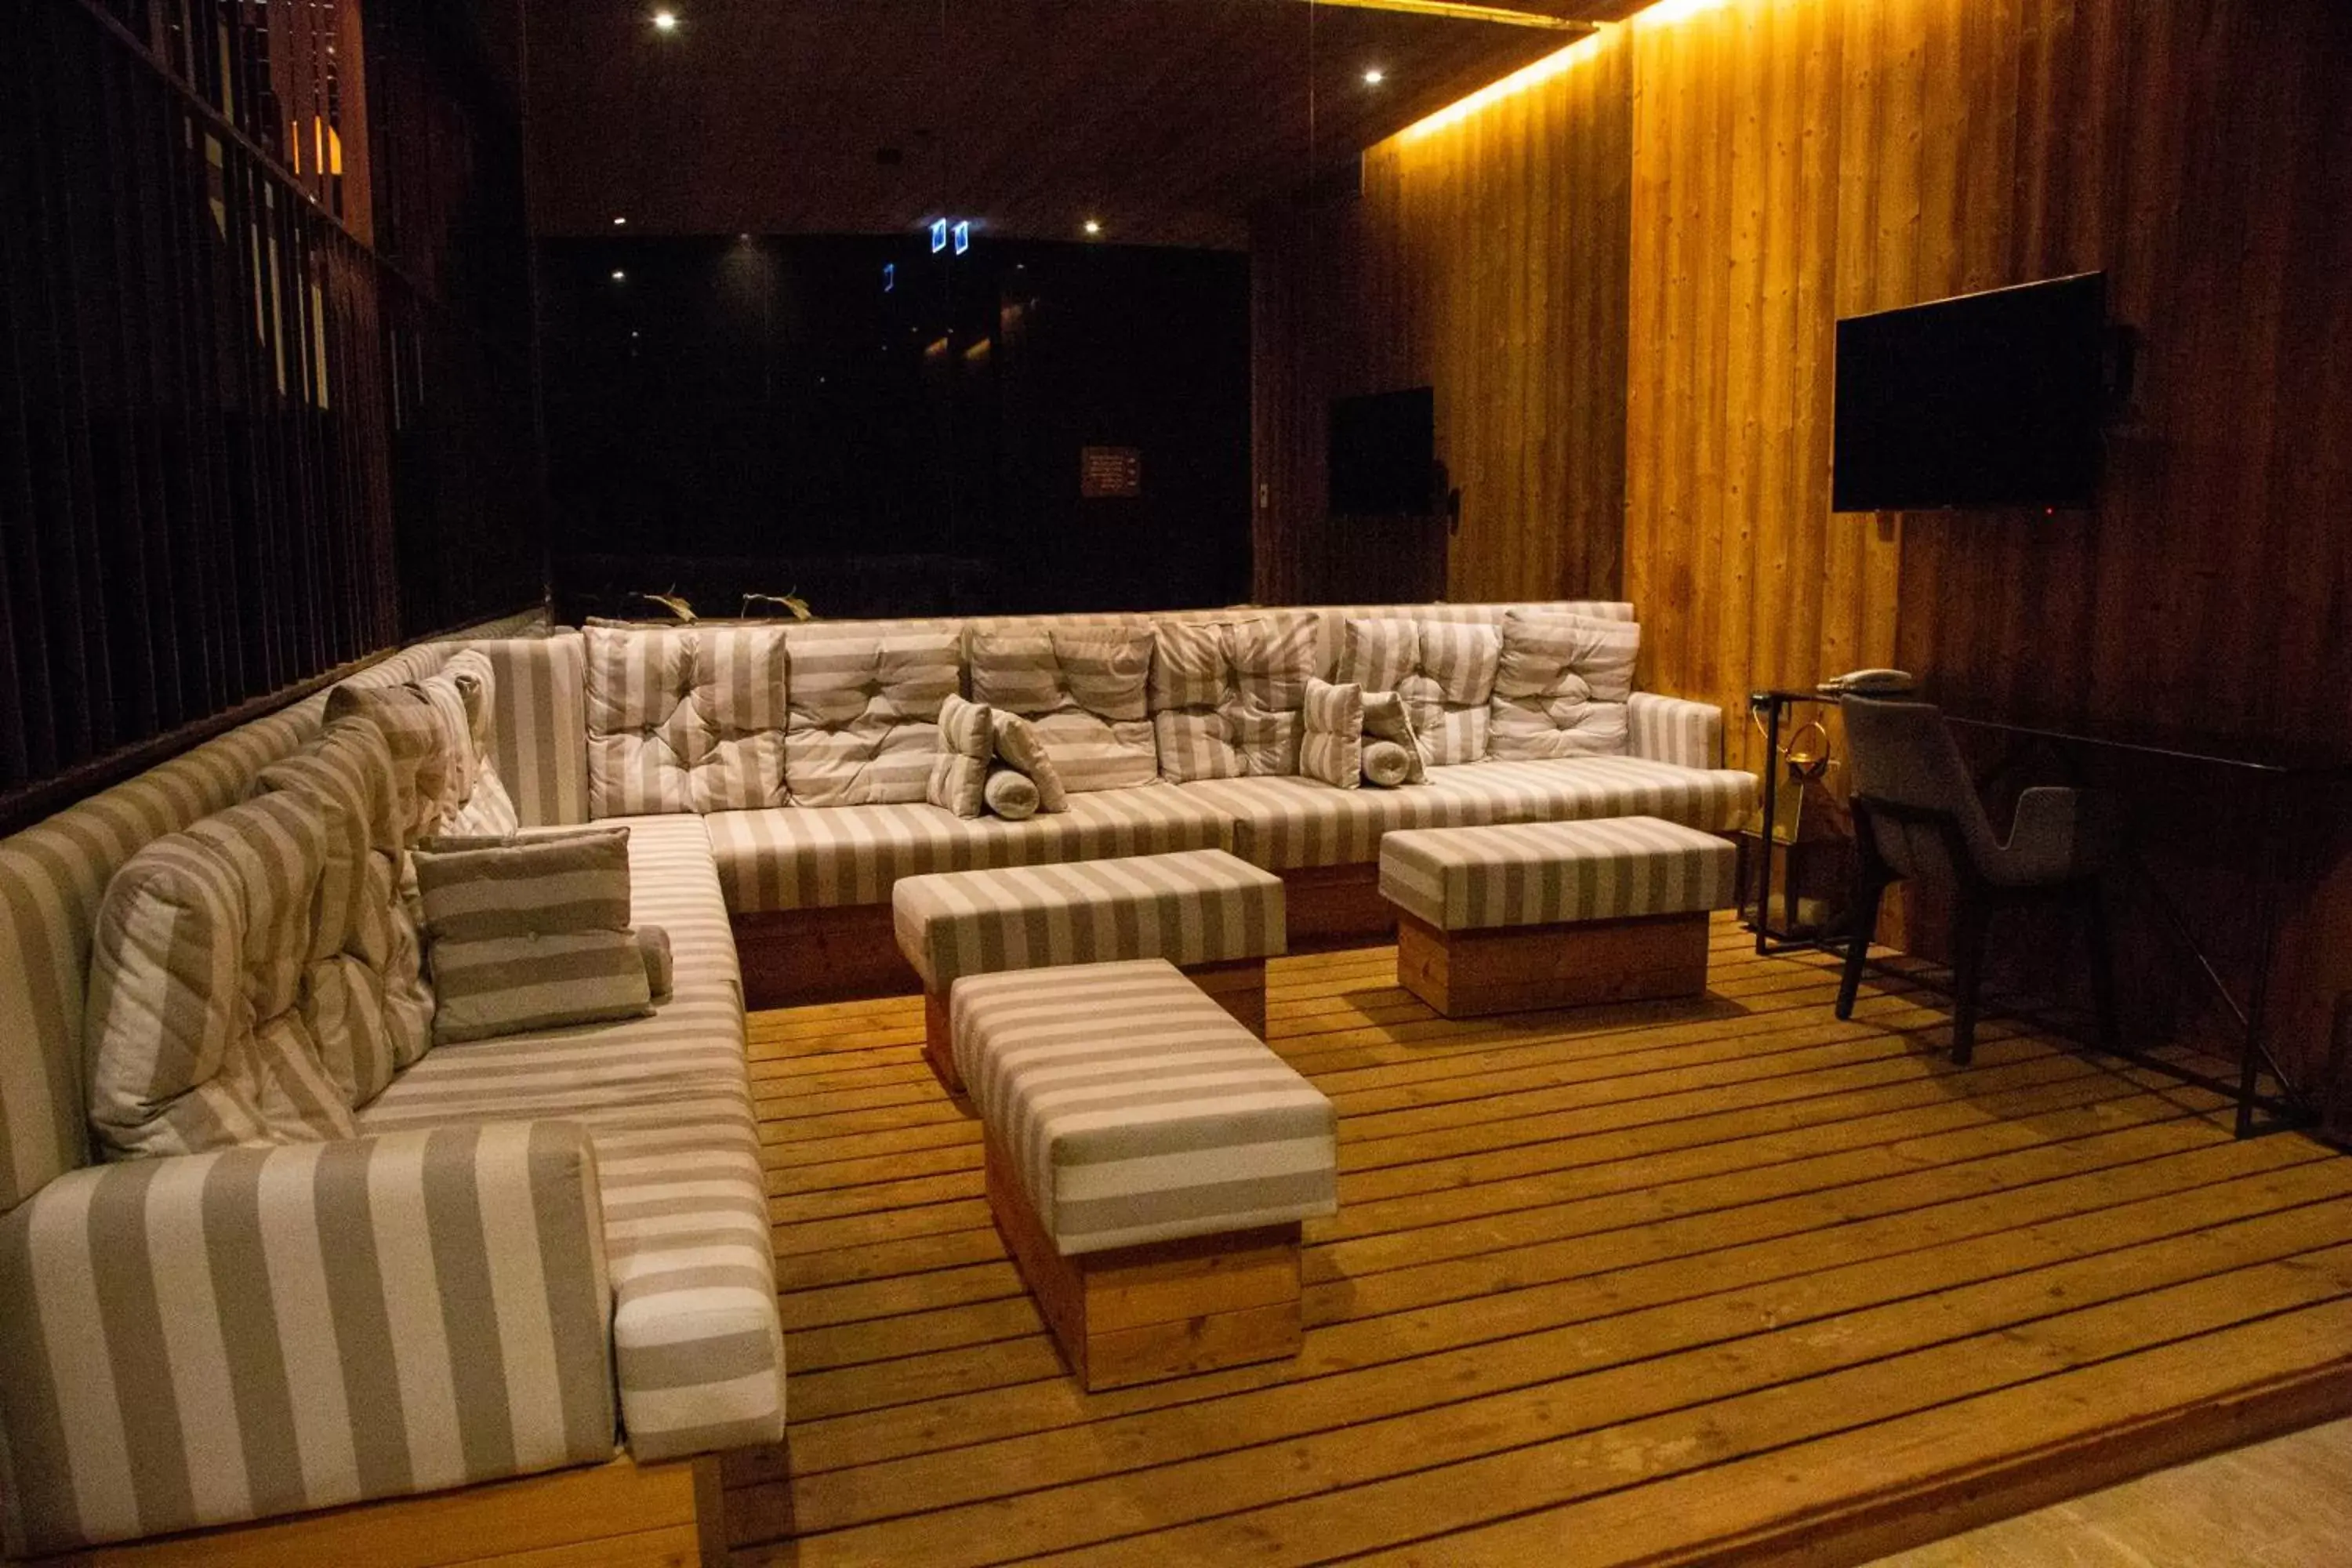 Sauna, Seating Area in Dosso Dossi Hotels & Spa Downtown